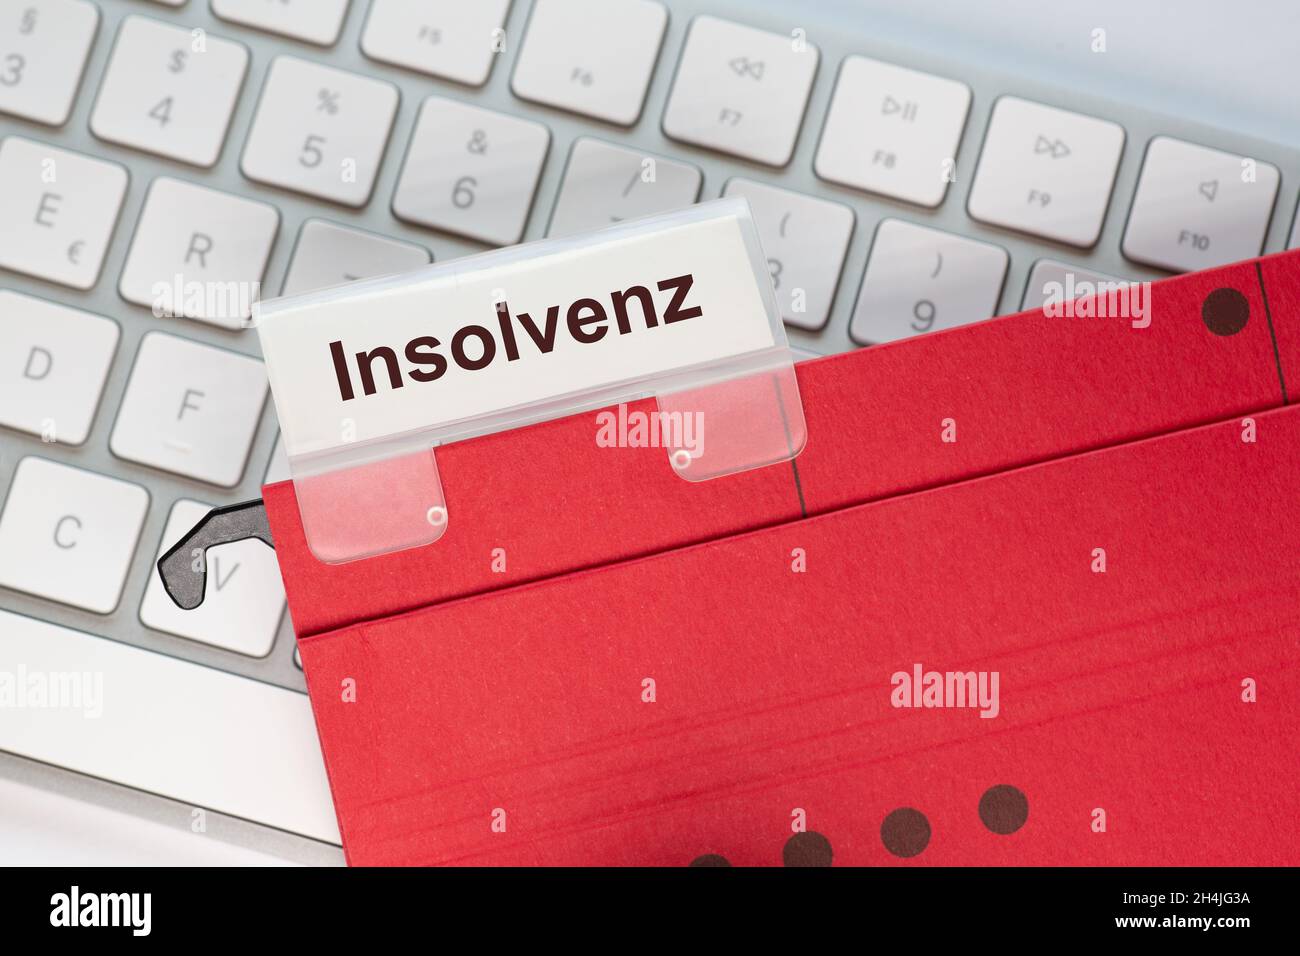 The German word for insolvency can be seen on the label of a red hanging folder. The hanging folder is on a computer keyboard. Stock Photo